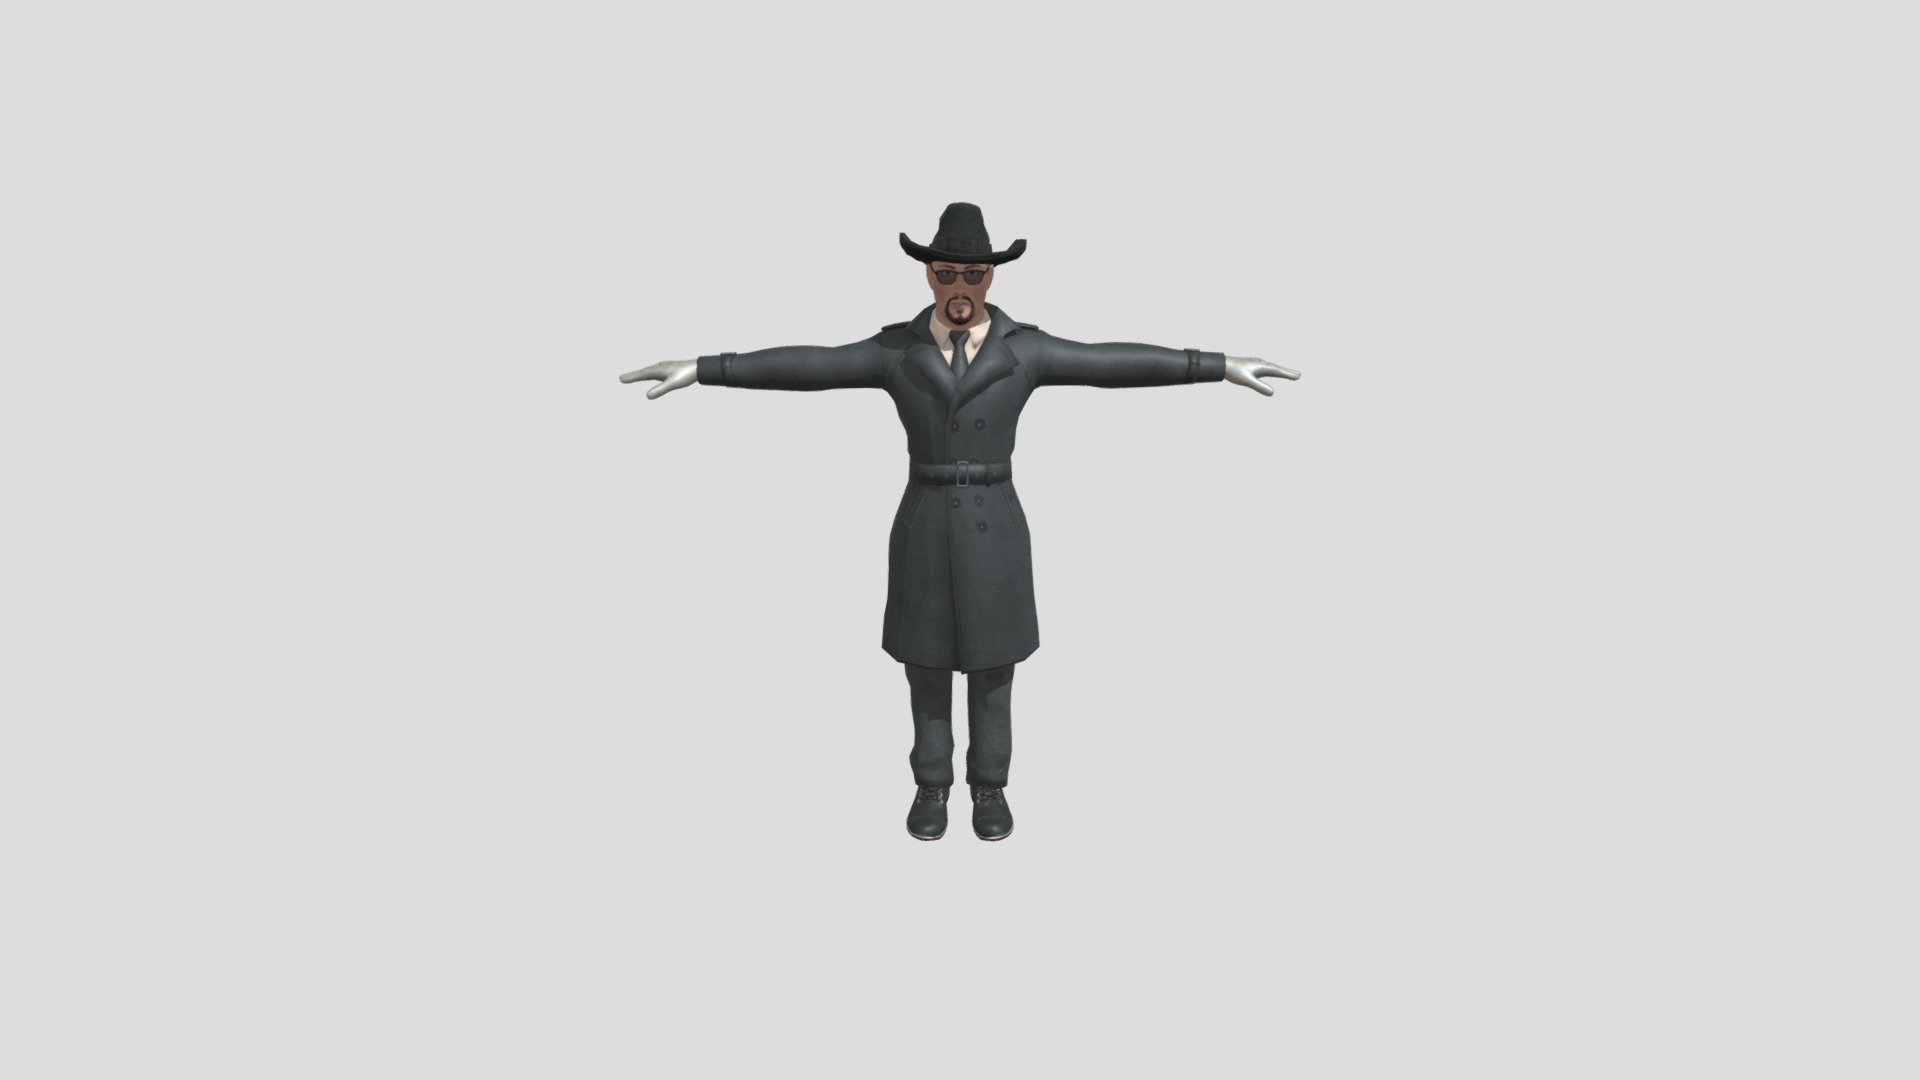 3d Character Of Mafia Character made in Autodesk Maya 2020 low-poly game ready with jpeg texture also embed texture  normal maps lowpoly game ready suite,
buy and use it,

File format.

rar. file open and use,

FBX-Embed texture fbx 2020 

MB(Maya Binary) 2020

obj (2020)

DAE-FBX 2020

if you need anything about this you can ask me through text i will help.
thanks alot 3d model